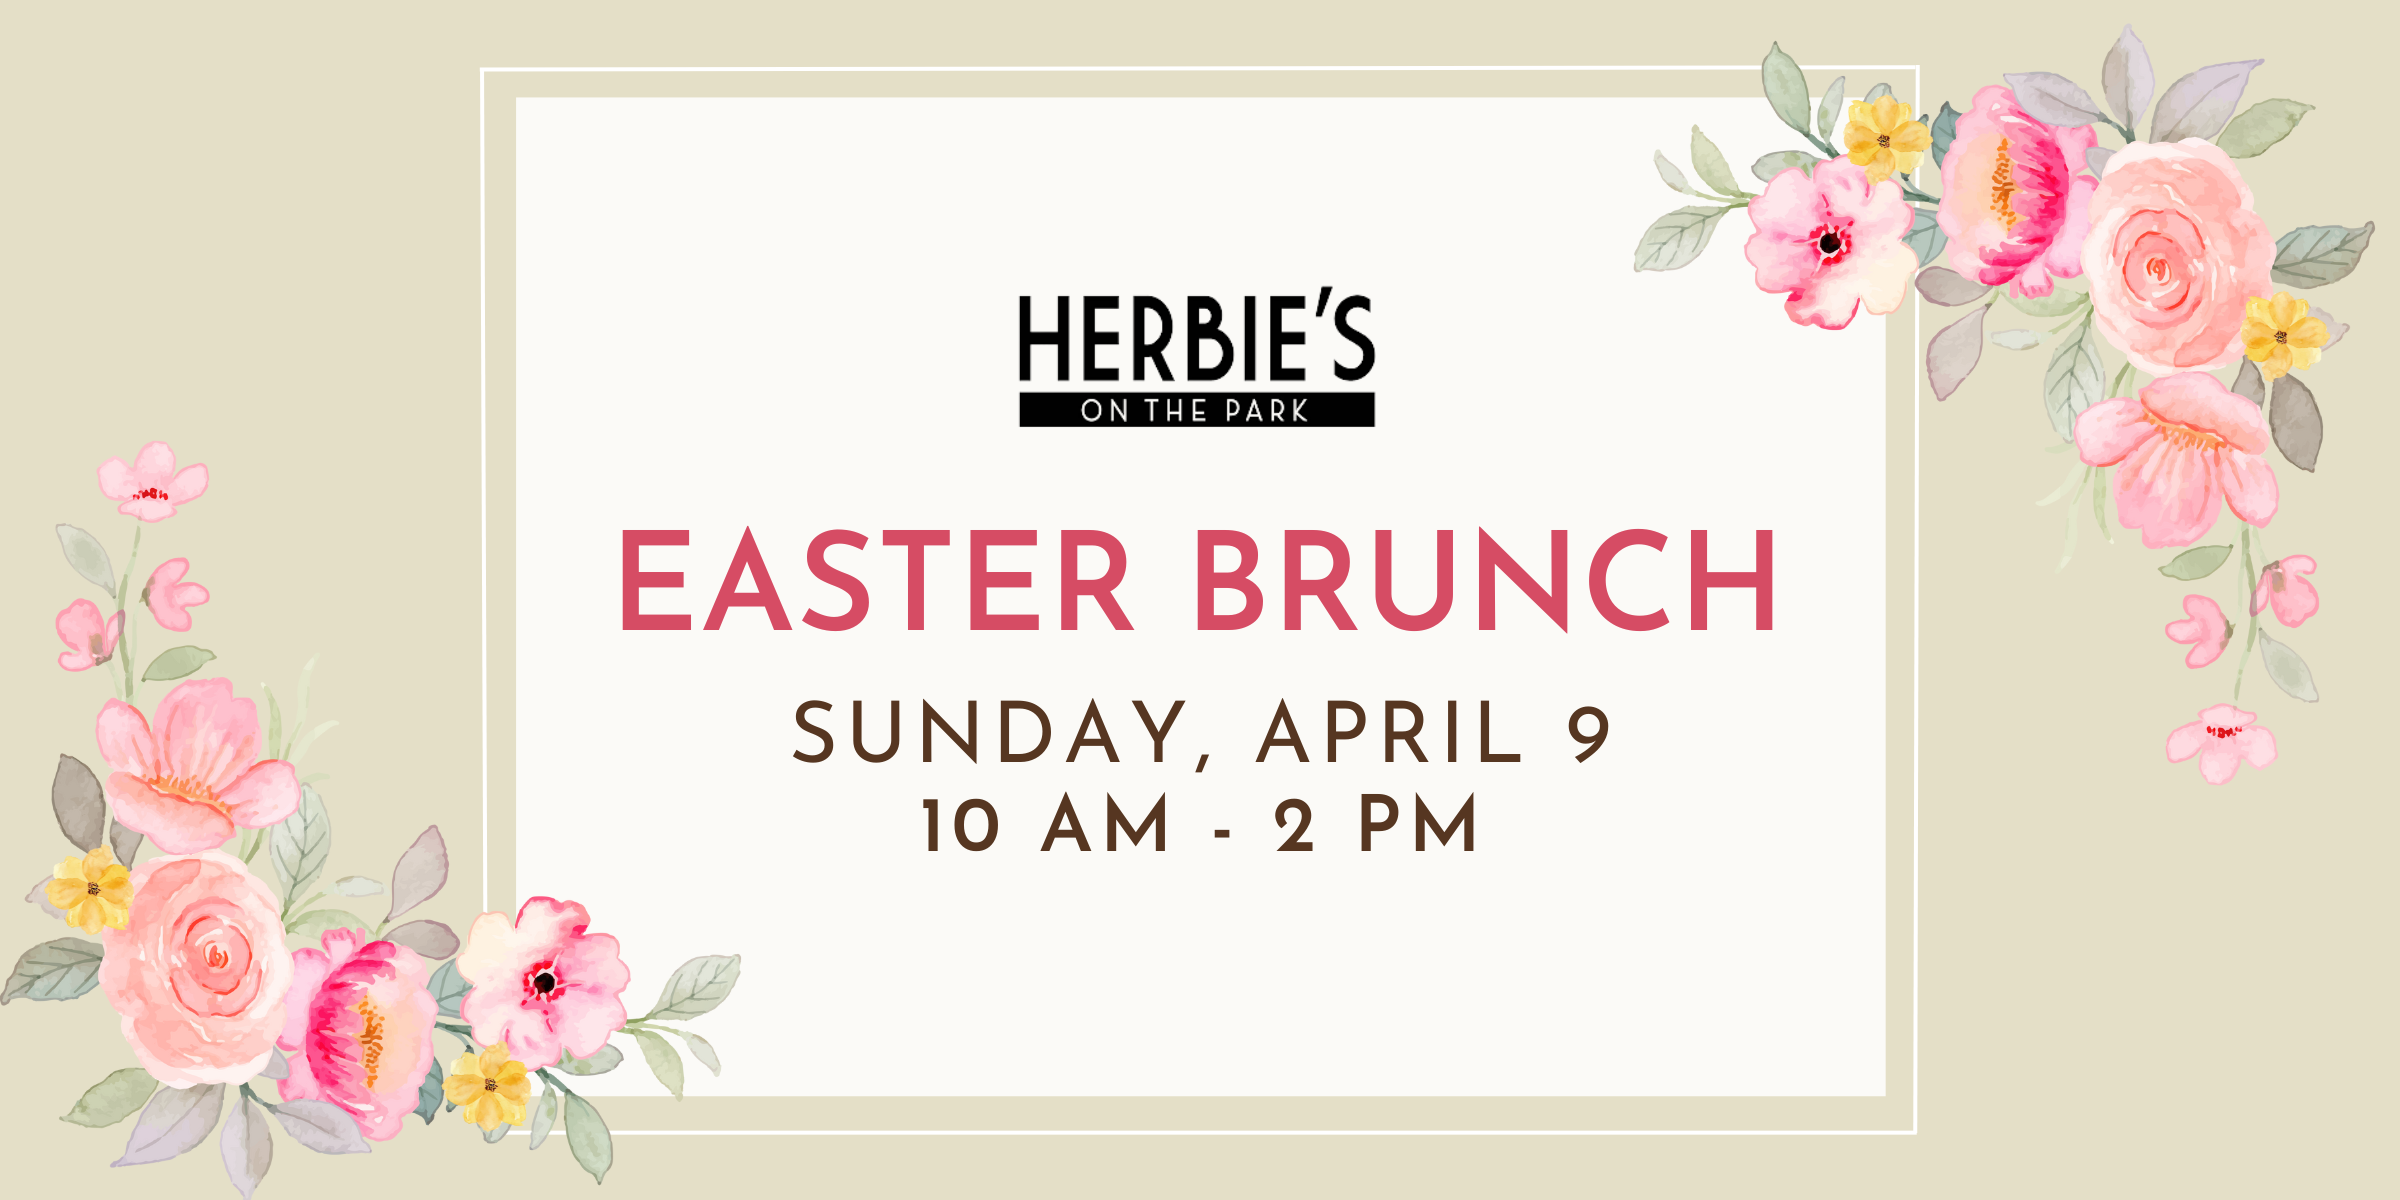 Easter Brunch at Herbie's on the Park in St Paul Minnesota